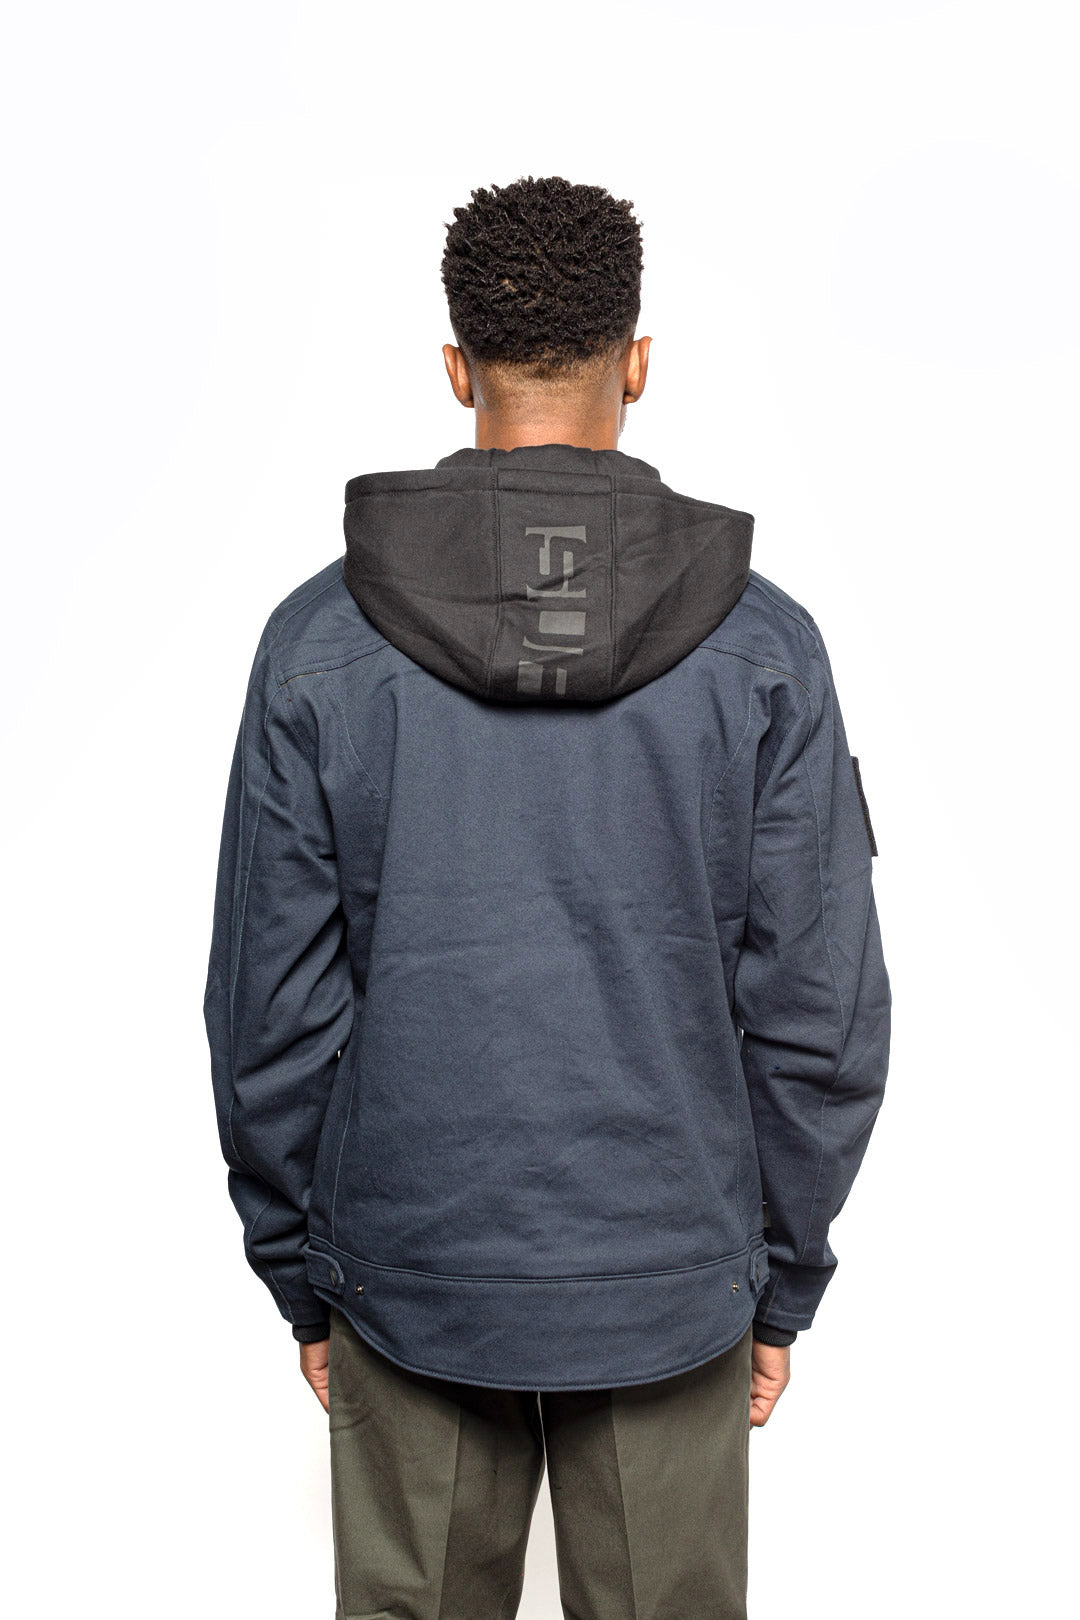 Back view of Male model wearing Chisel Hooded Jacket in midnight colorway.